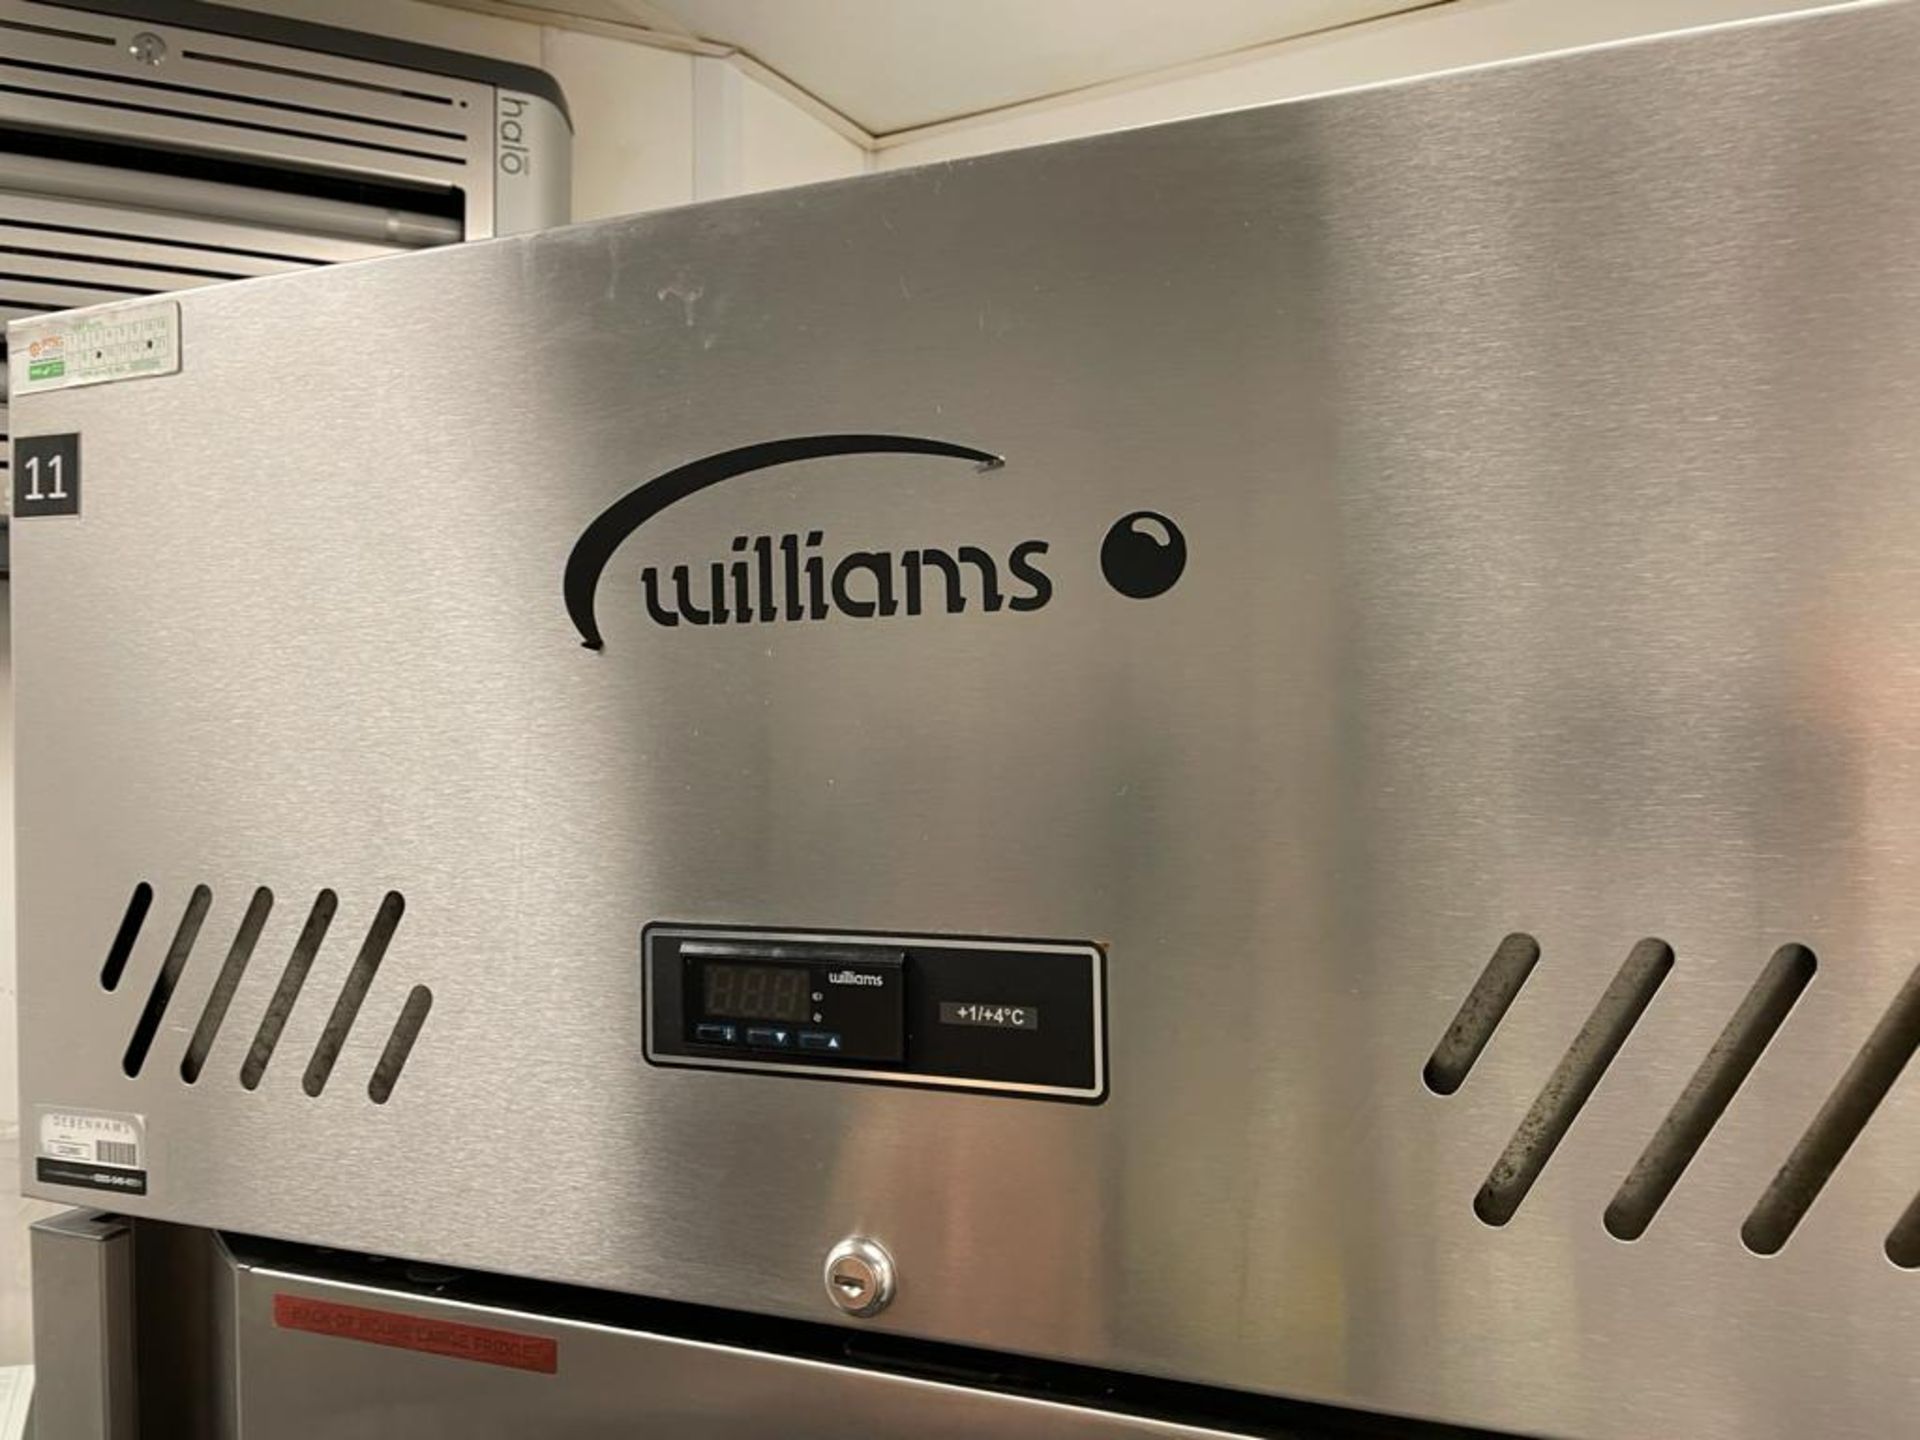 1 x Williams HJ1SA Commercial Upright Refrigerator With Stainless Steel Exterior - CL670 - Ref: - Image 2 of 6